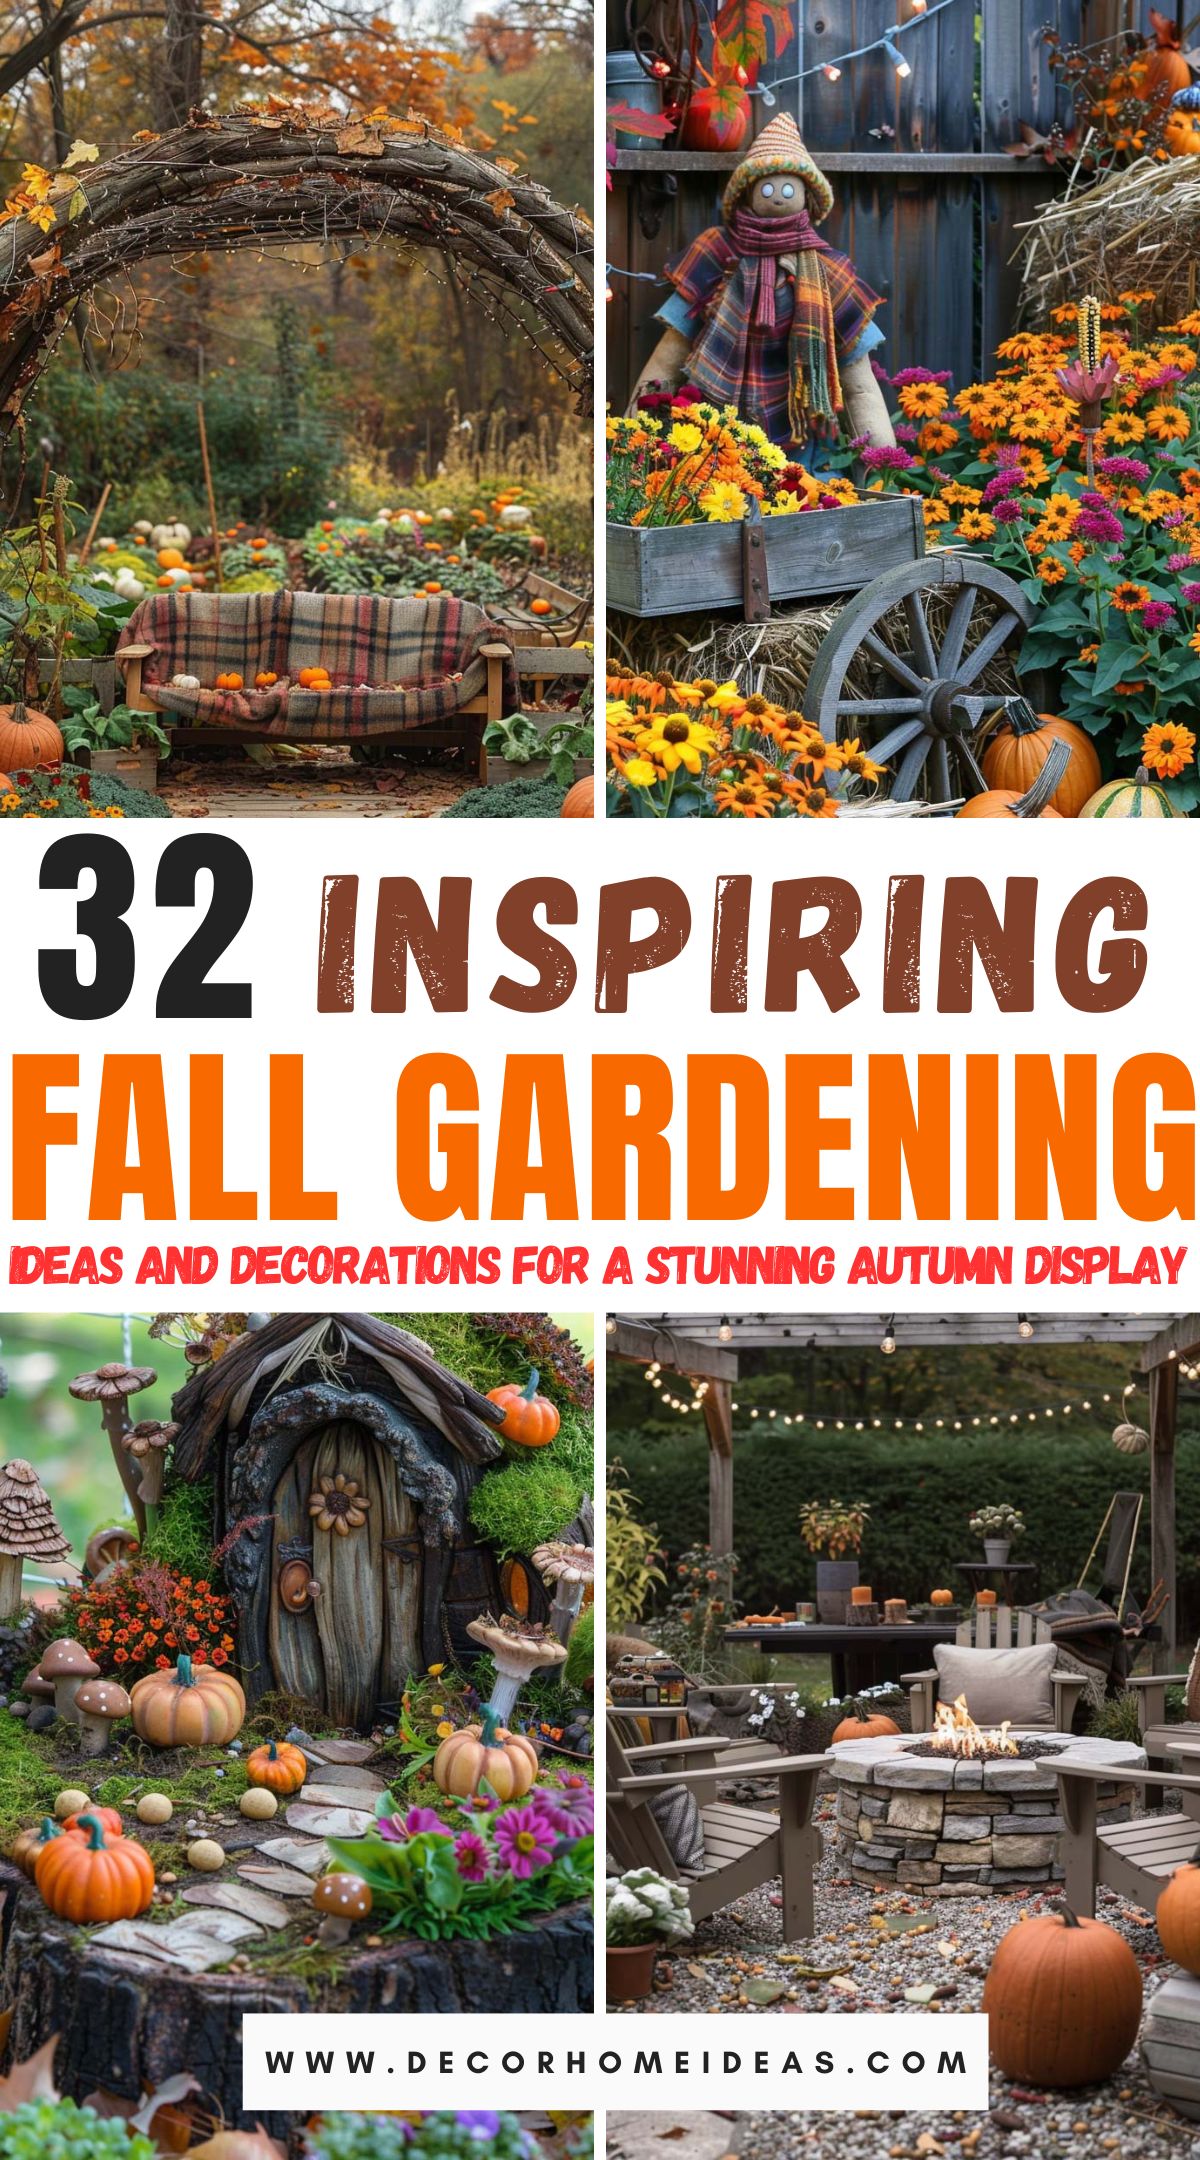 fall gardening and decorations ideas